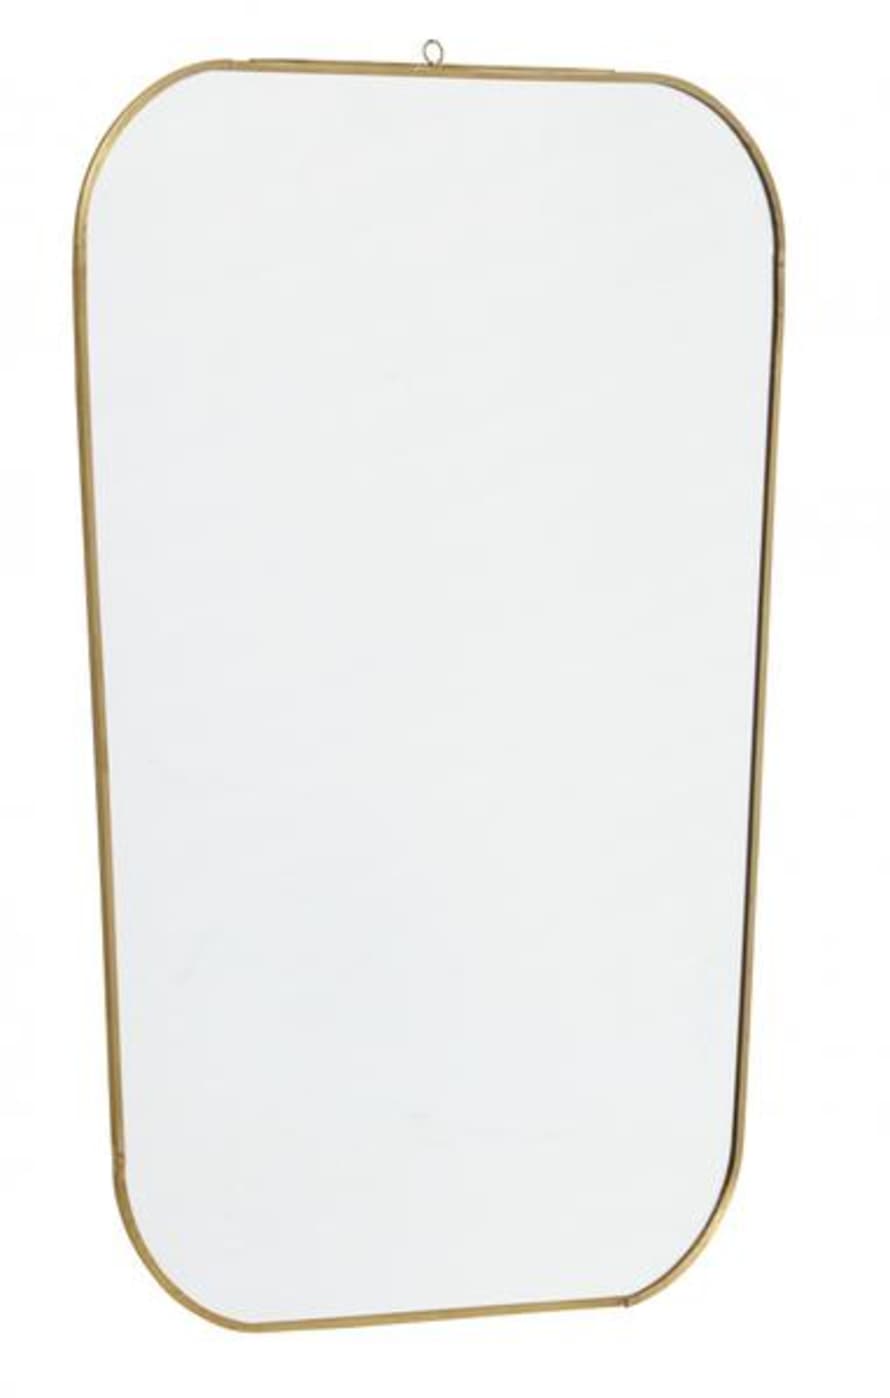 Nordal Mirror Square W Rounded Edges Golden